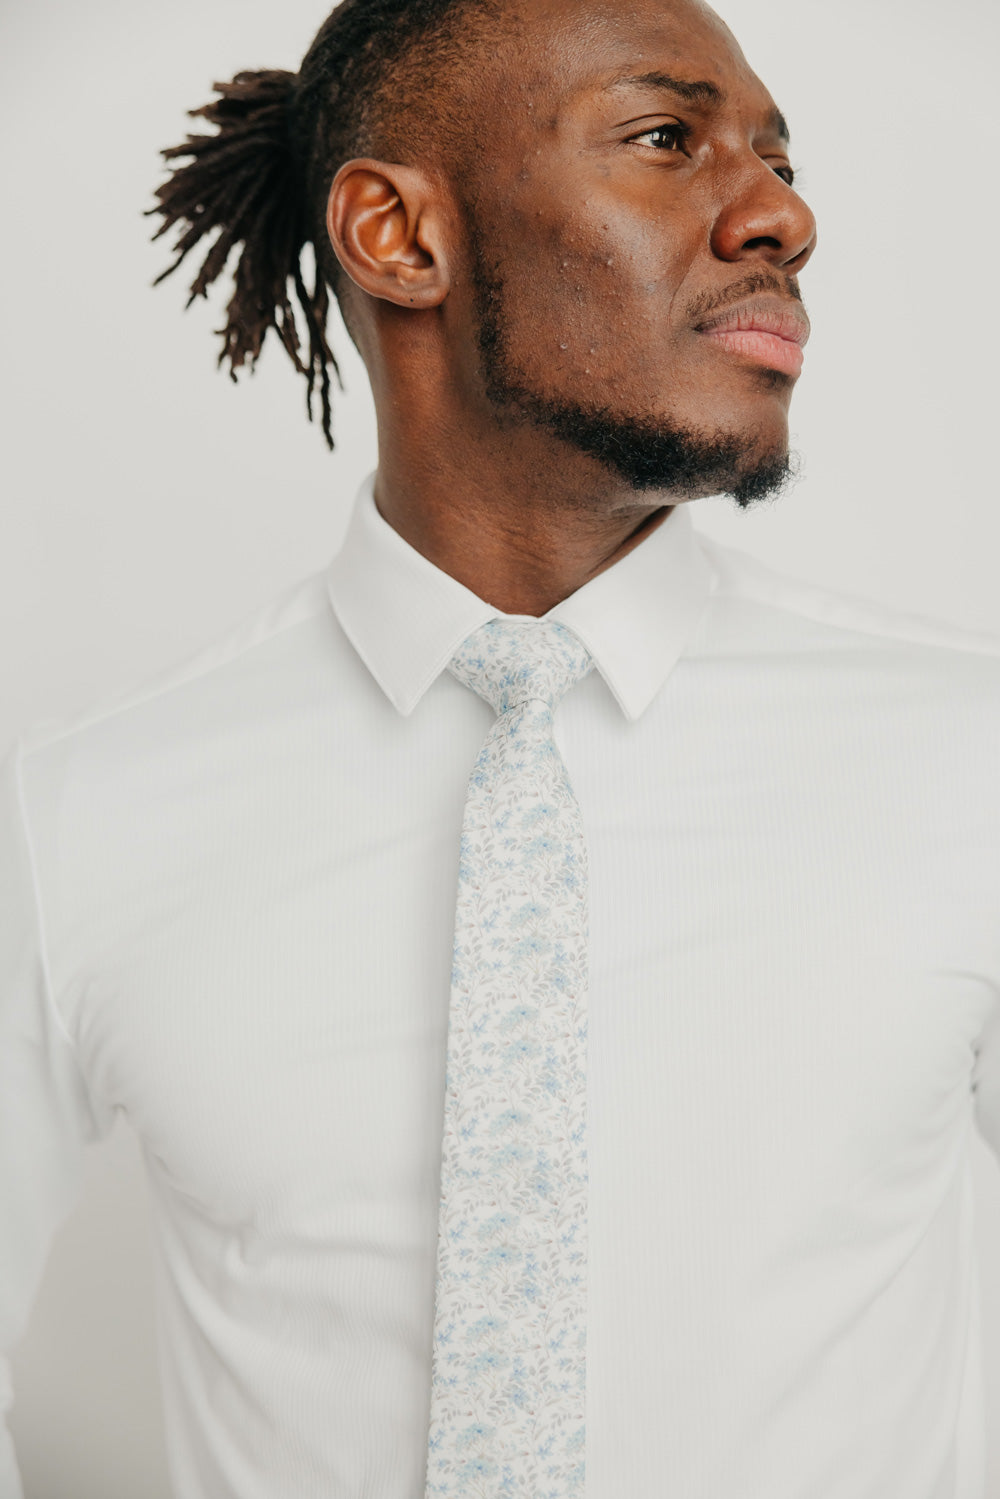 Bluebell tie worn with a white shirt.